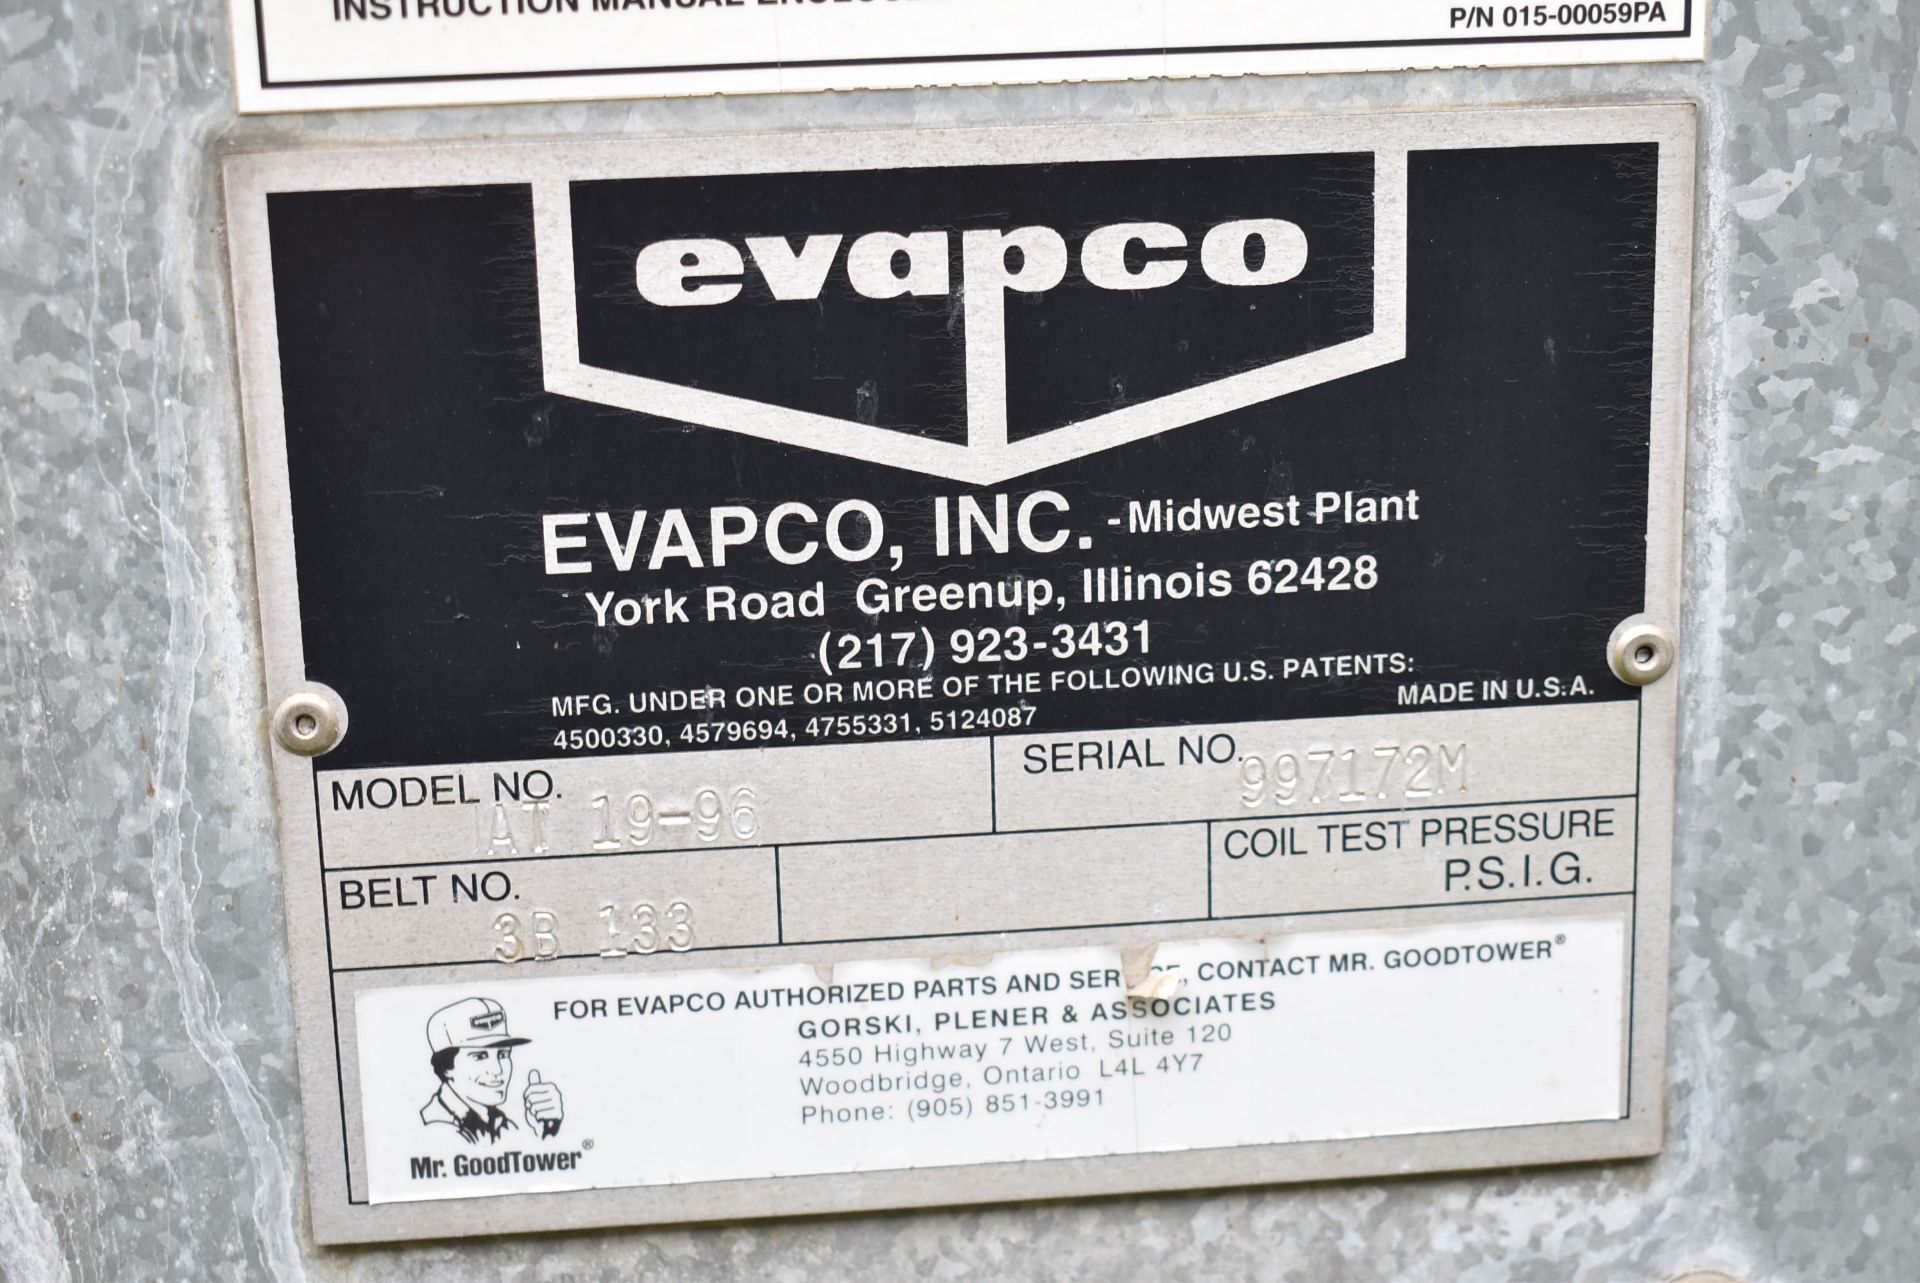 EVAPCO AT 19-96 COOLING TOWER WITH 15HP FAN MOTOR, 480GPM WATER CAPACITY, AND - Image 5 of 7